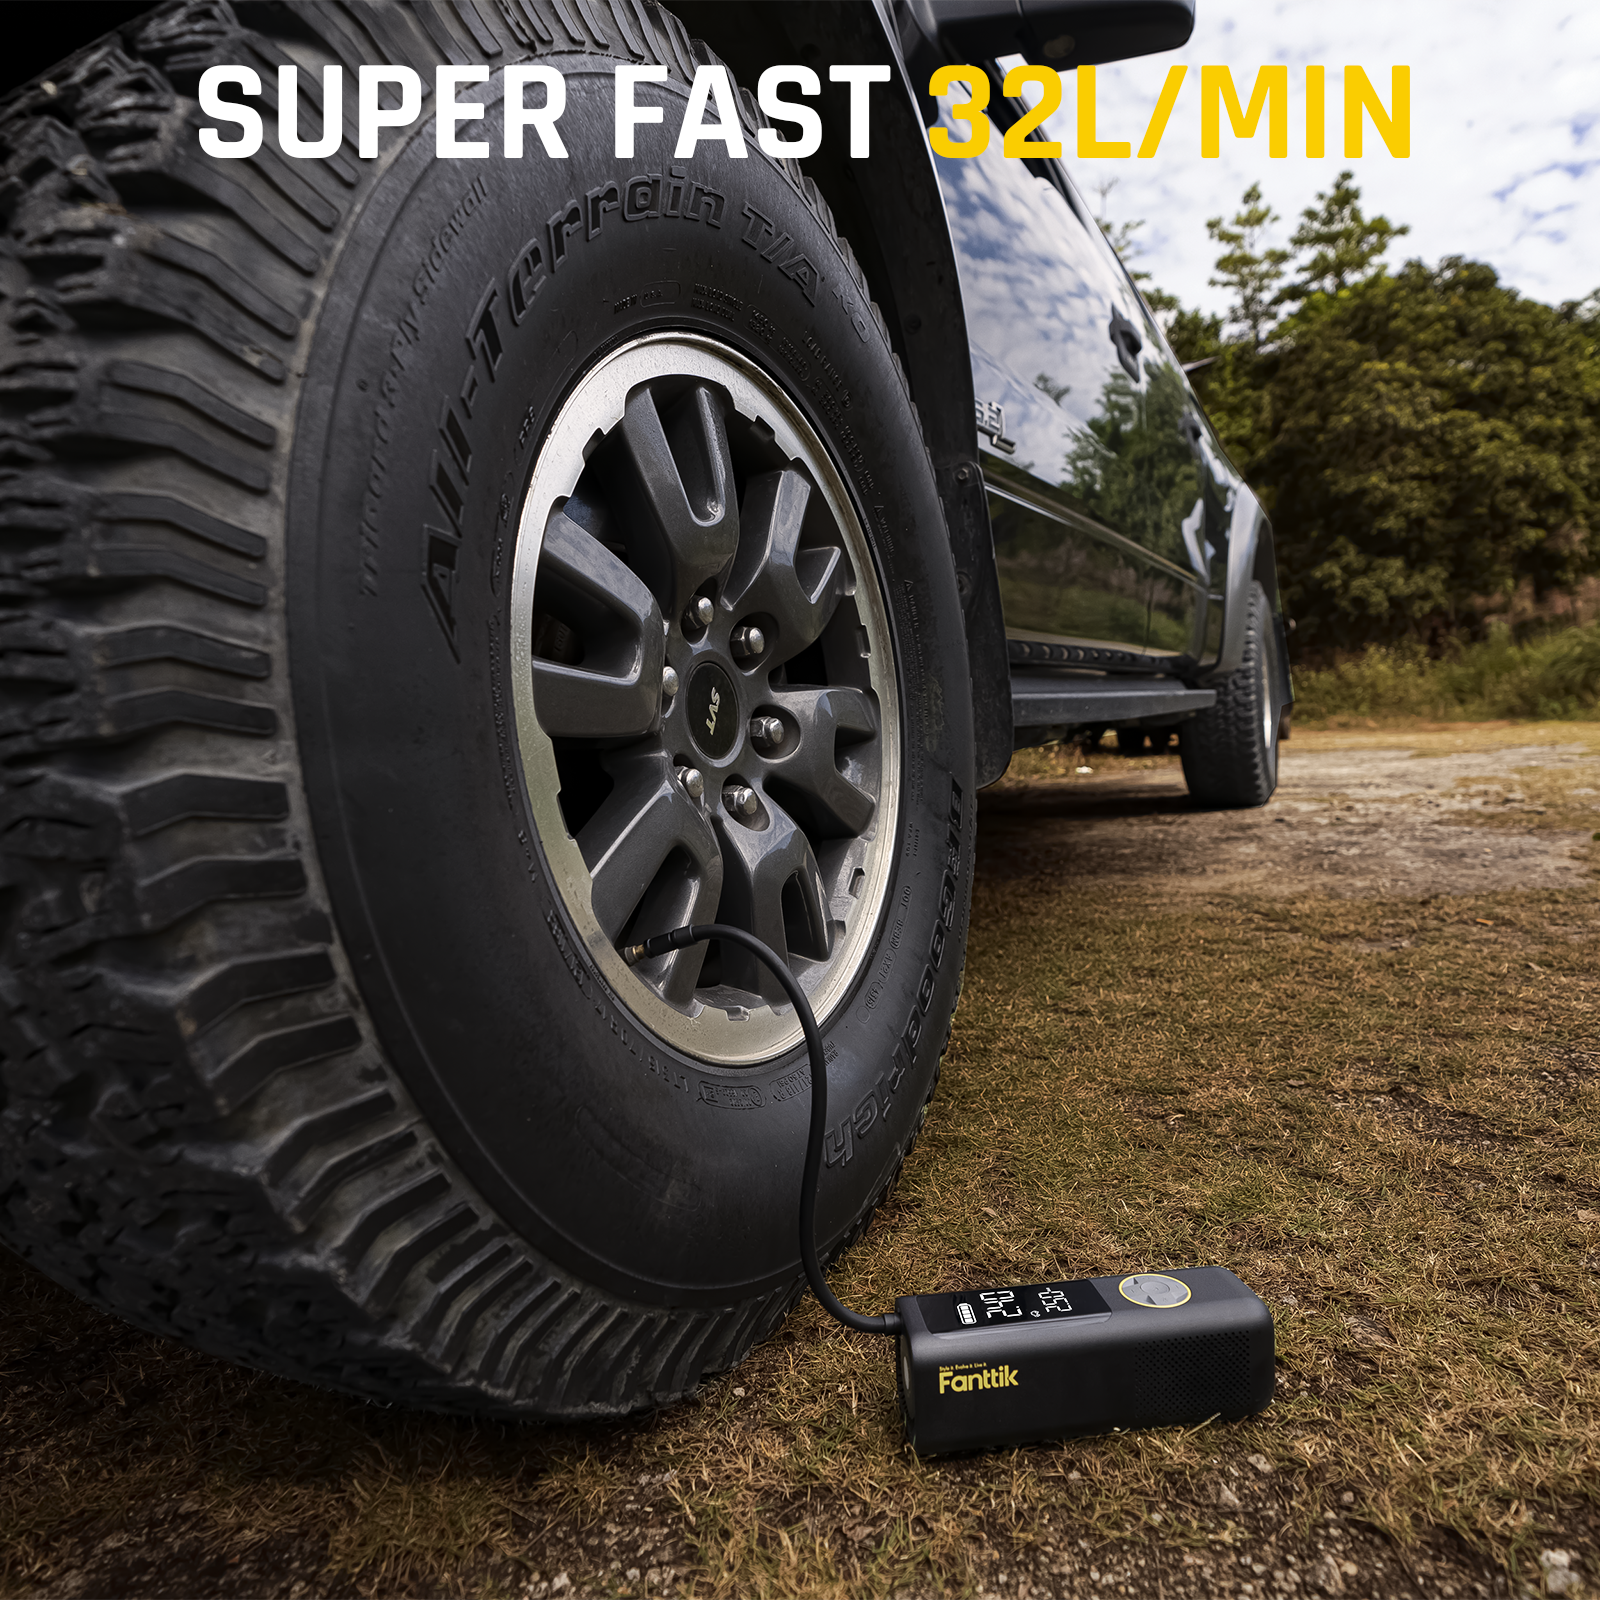 X8 APEX Tire Indflators have super fast inflations with 32L/Min